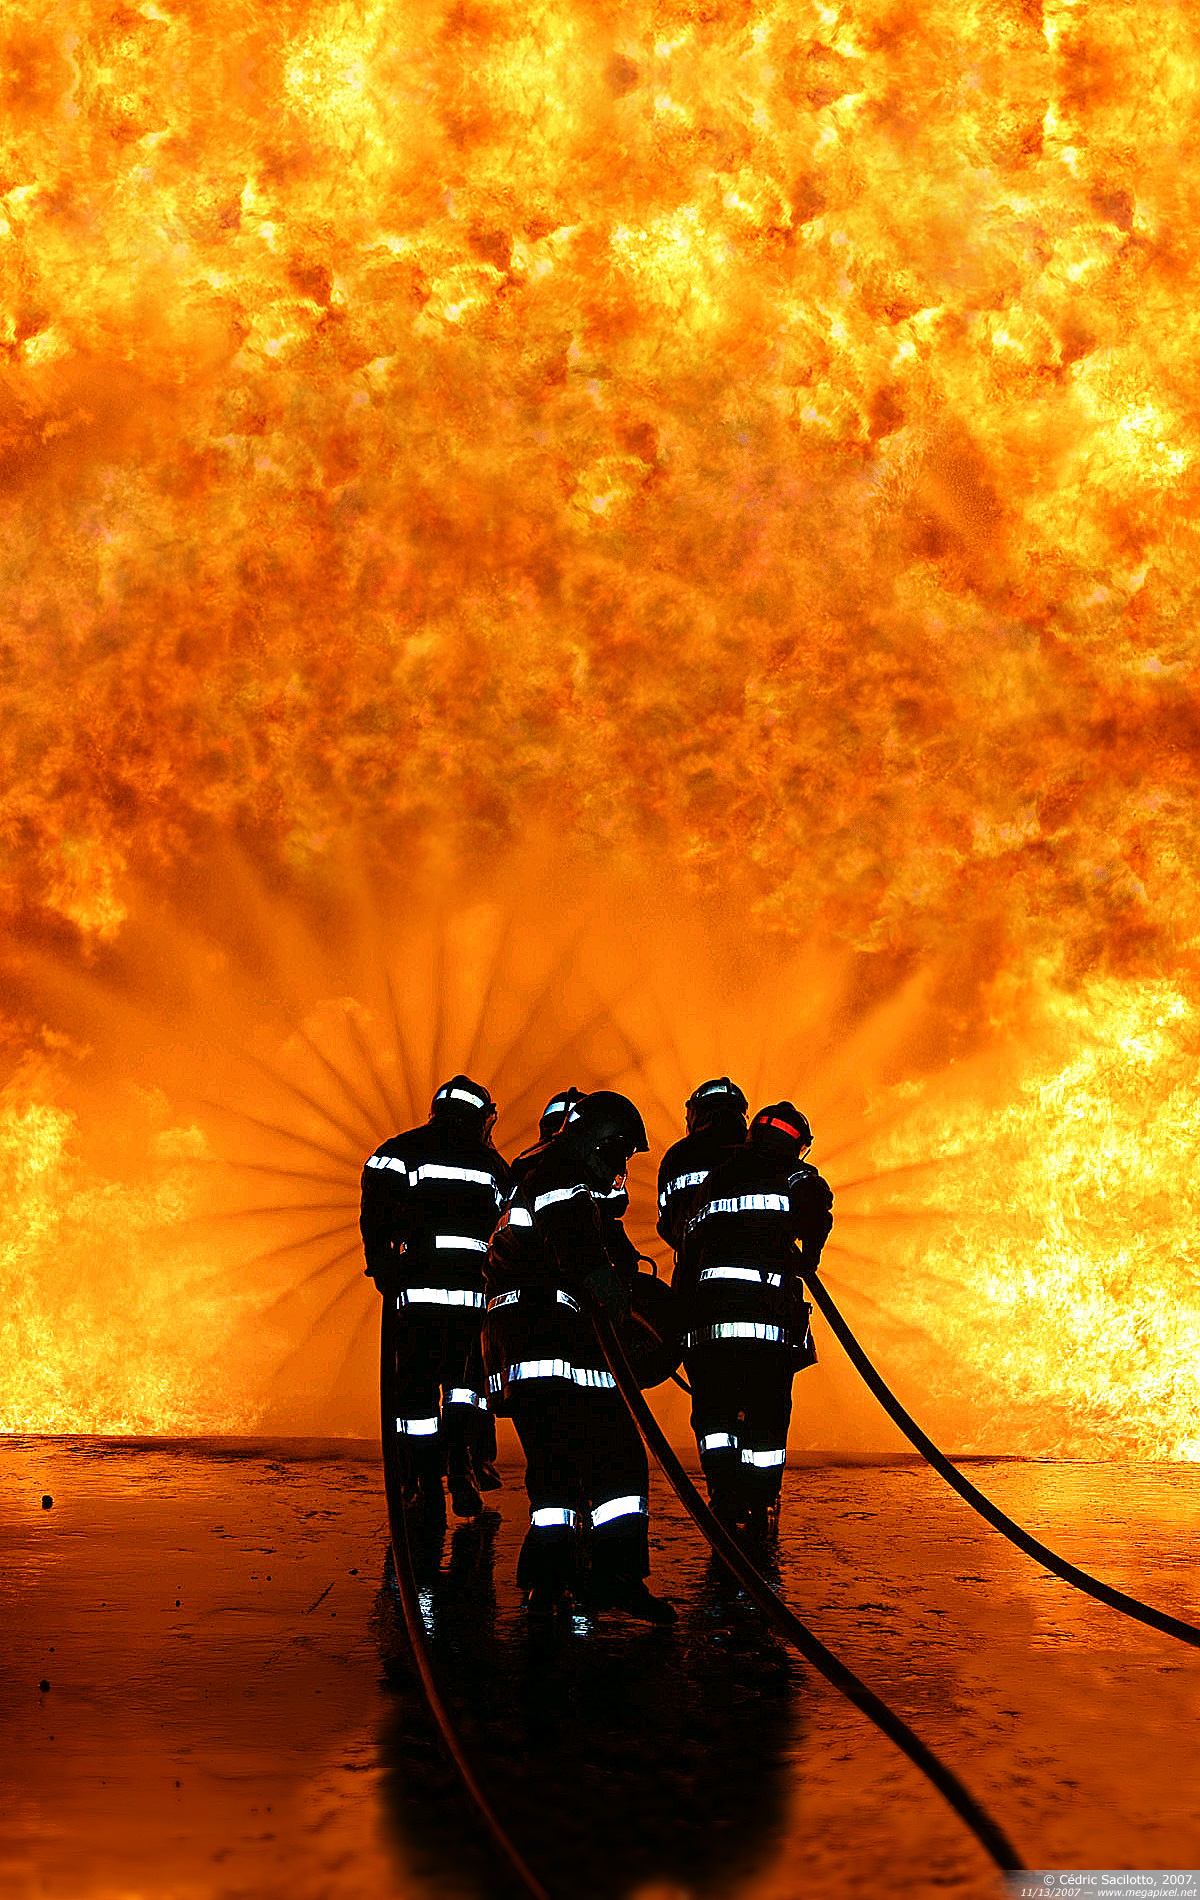 Incredible Orange Blaze Silhouettes Firefighters Spraying Water